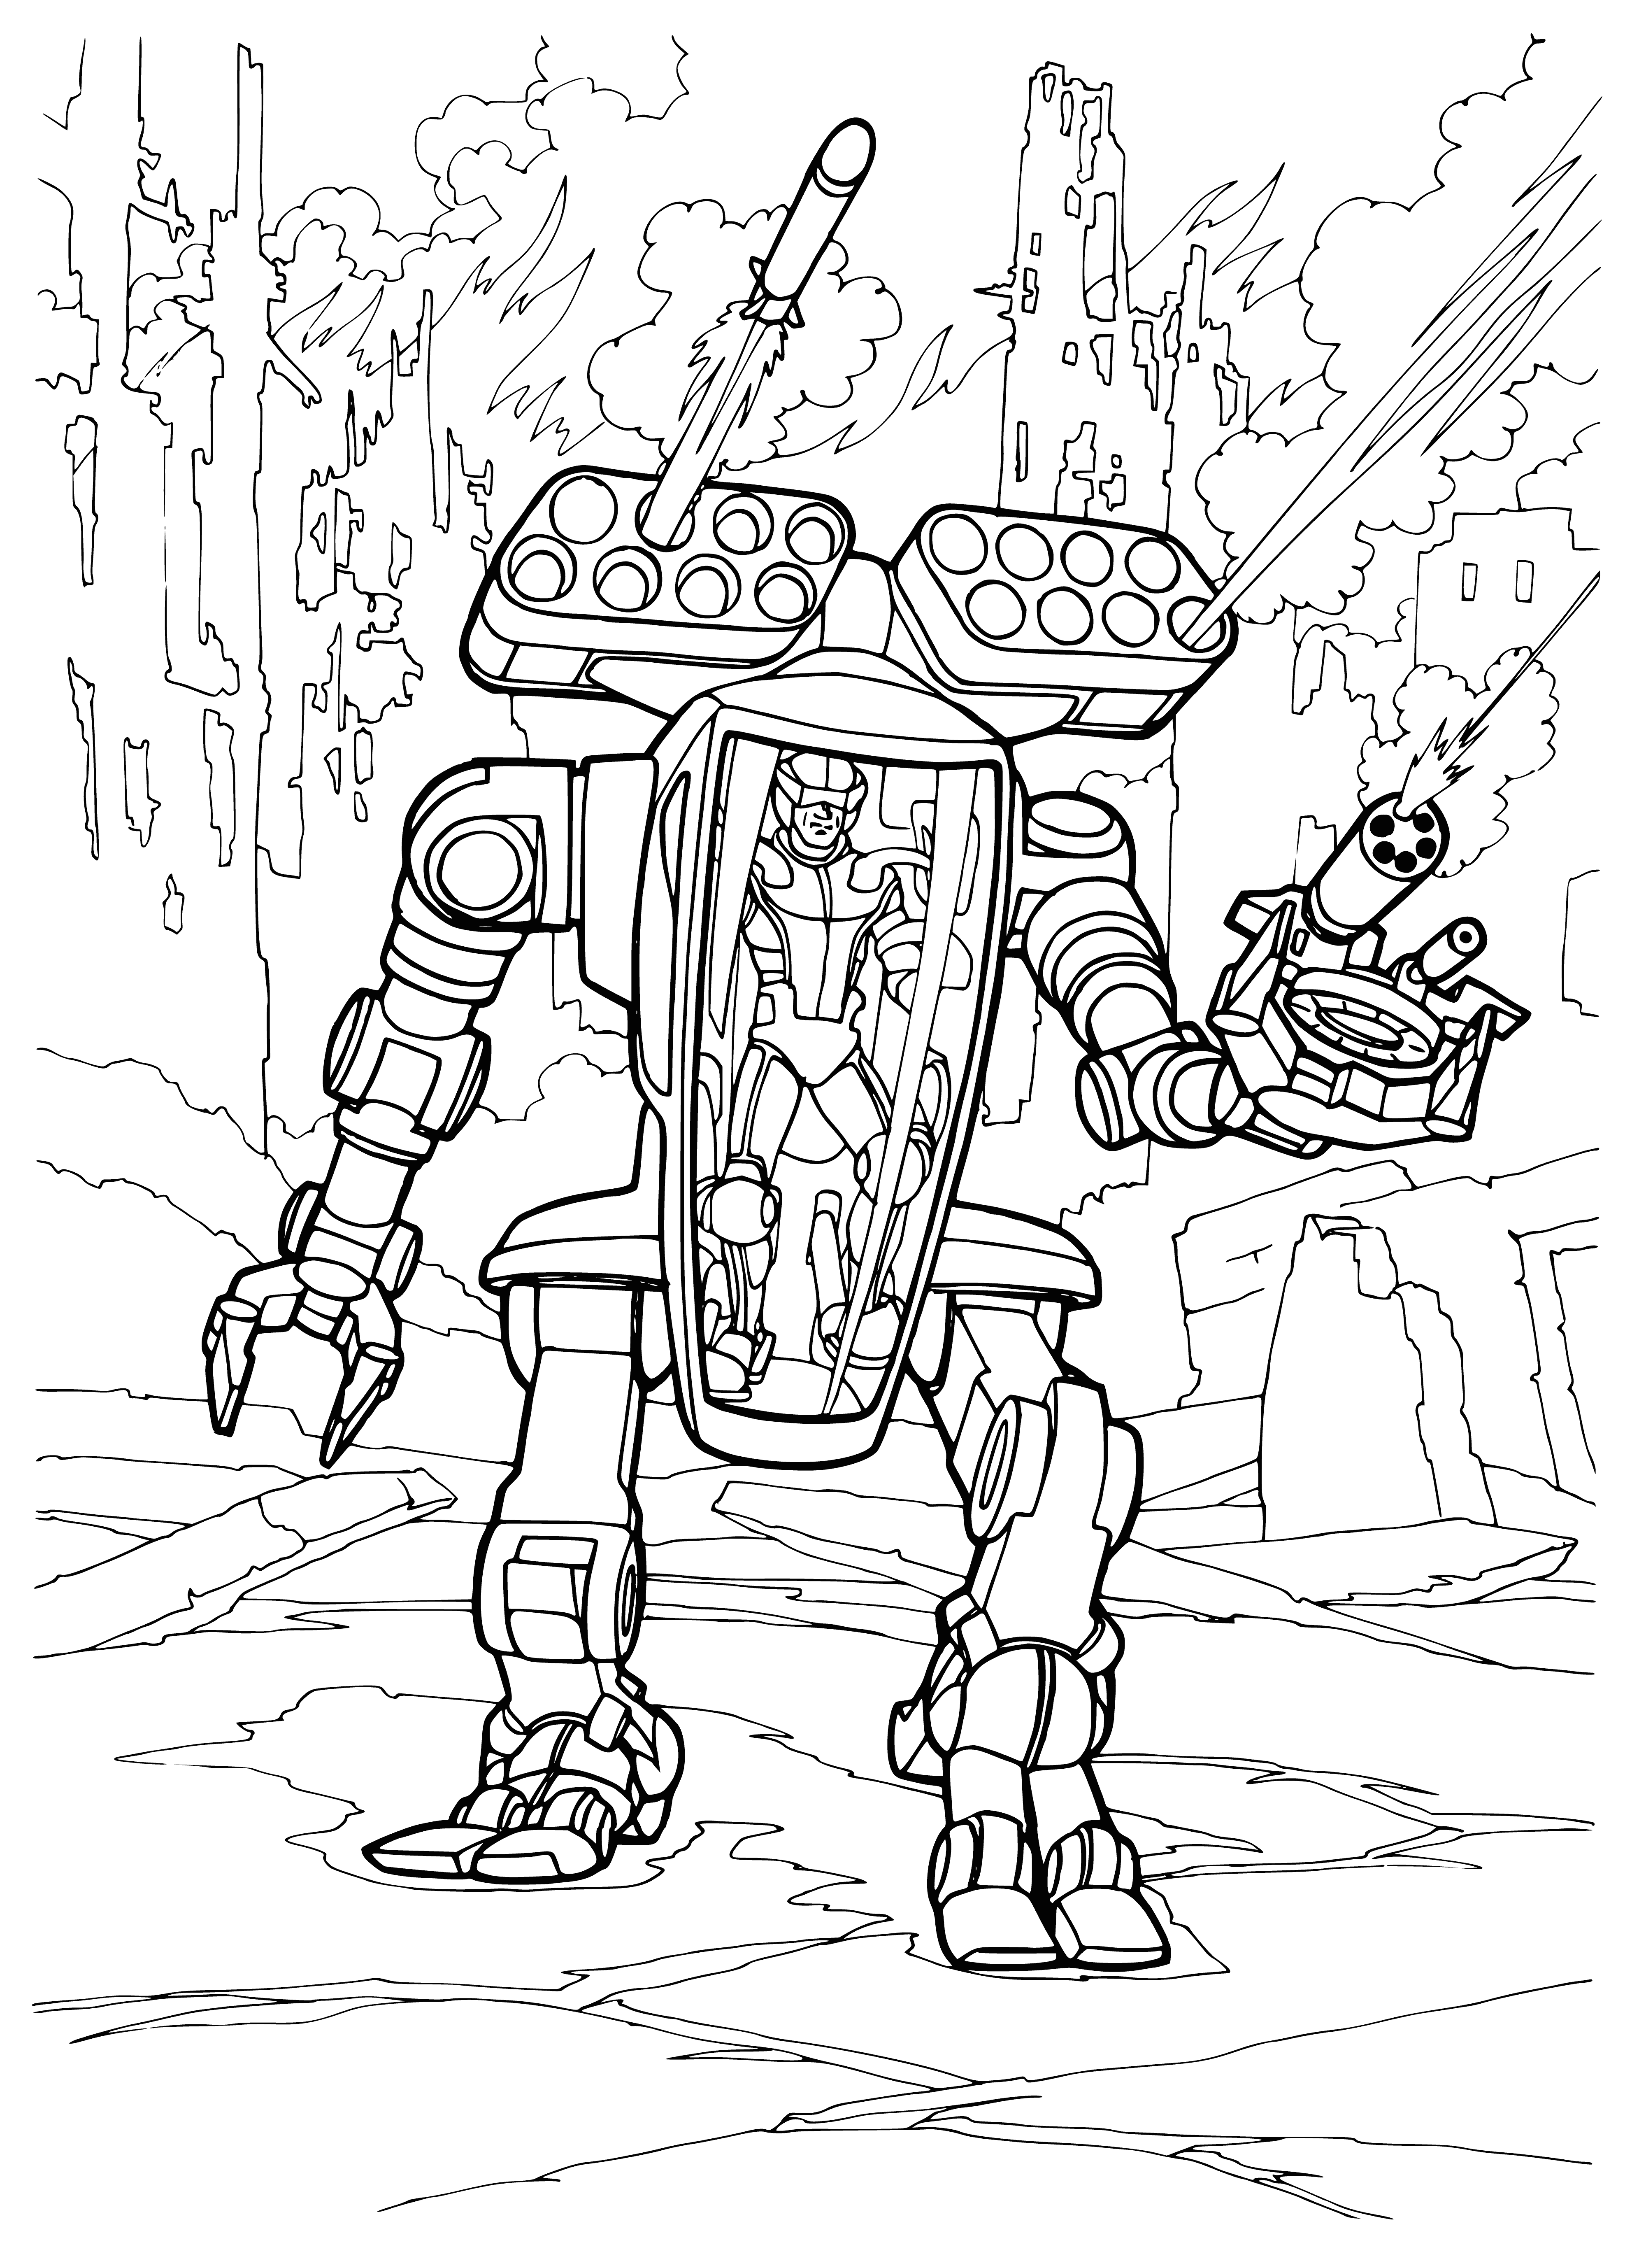 coloring page: Future wars will involve heavily-armed & armored infantry fighting in close quarters; soldiers must be careful when engaging enemy forces.